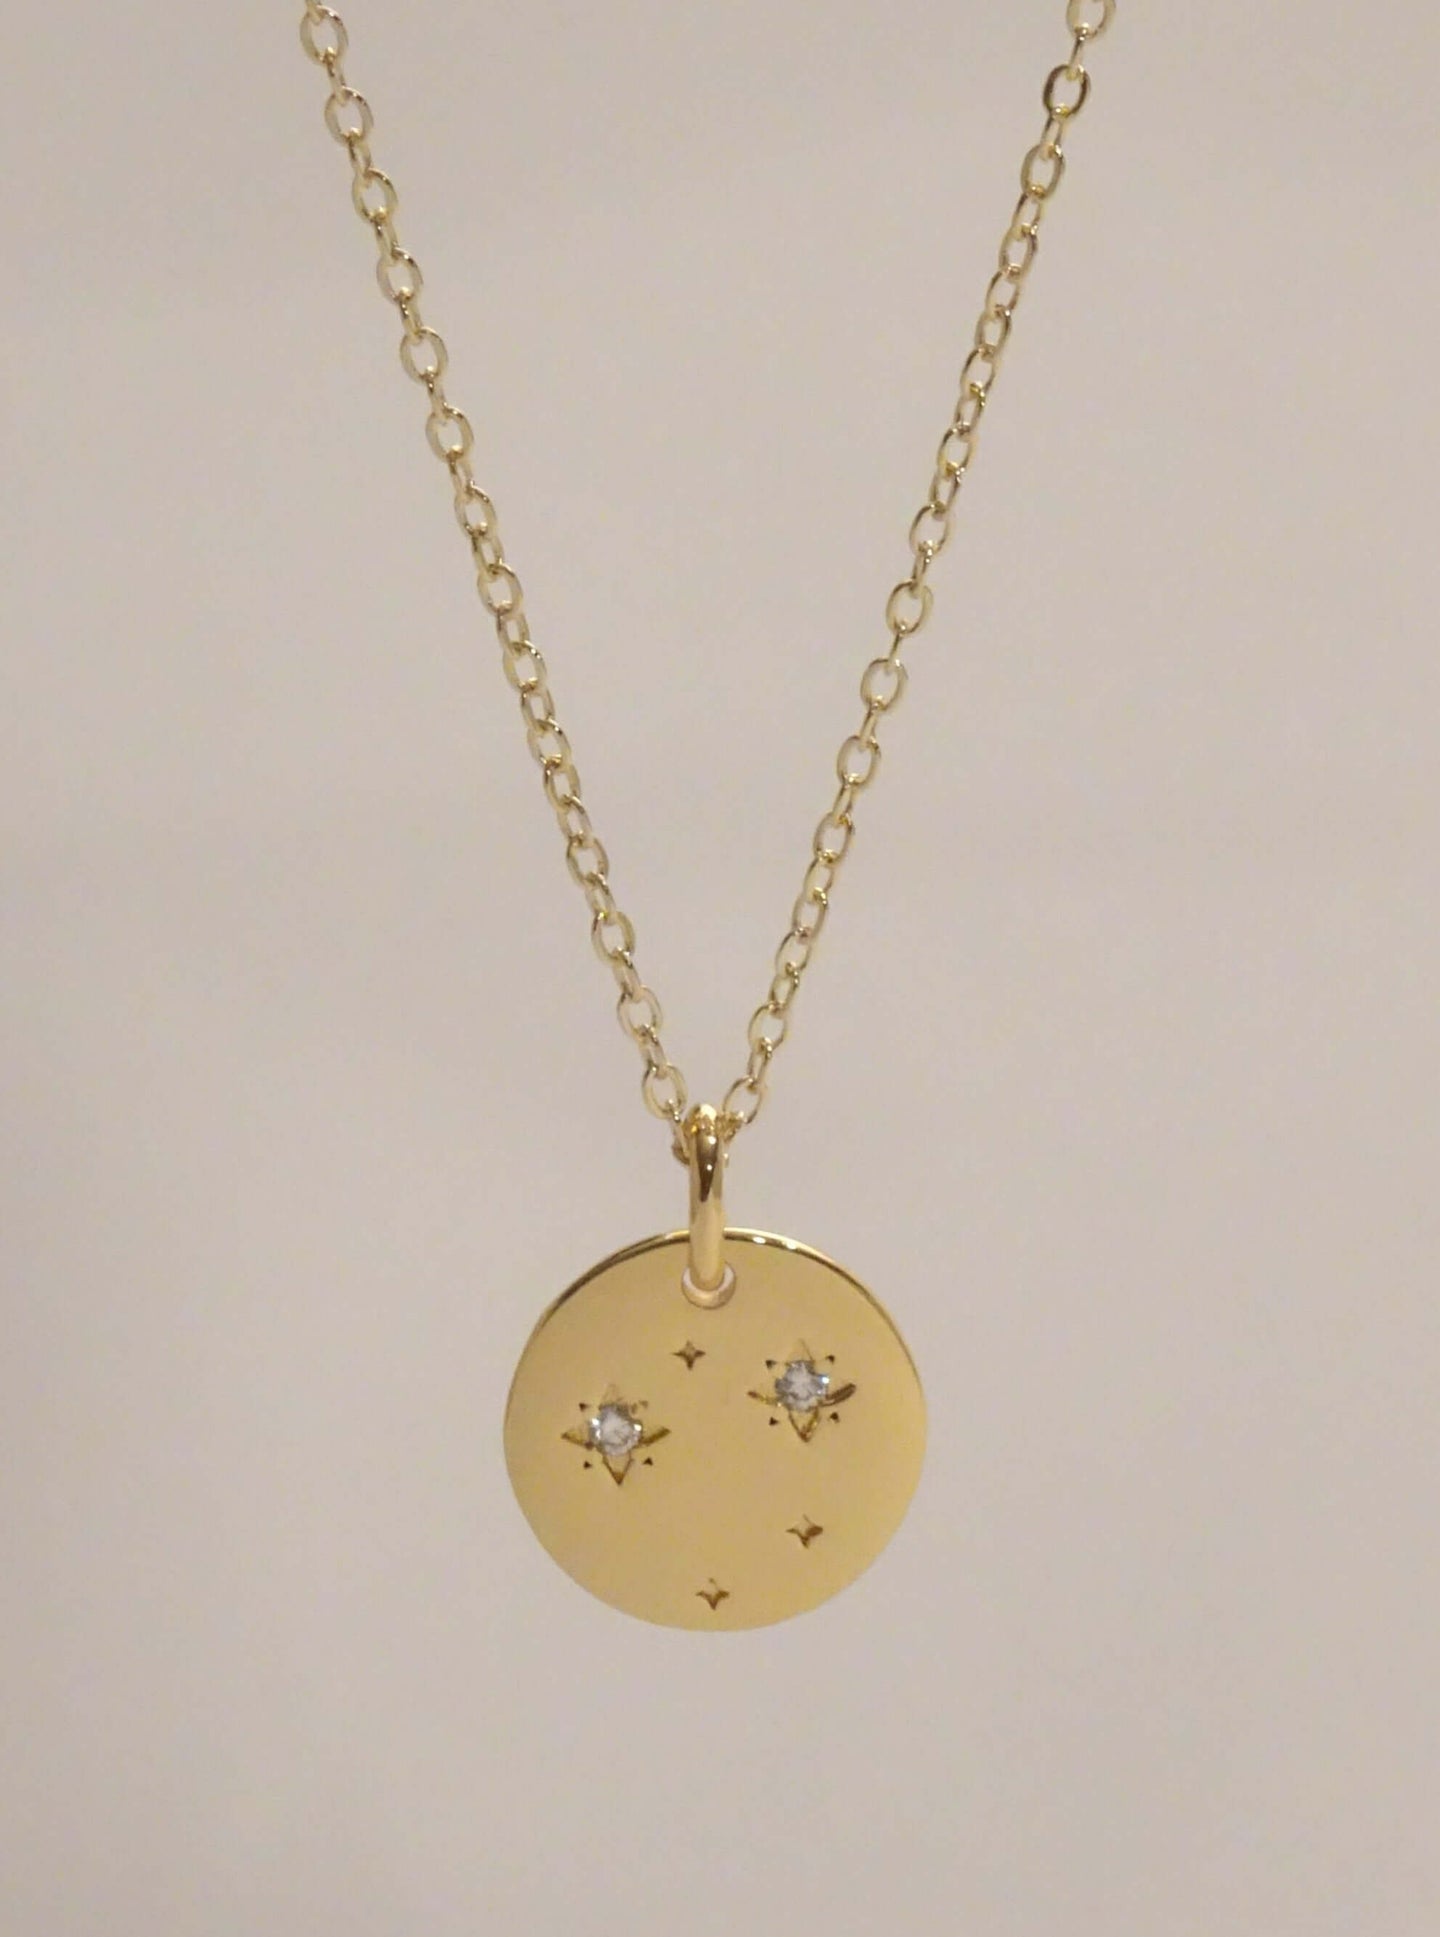 Libra necklace, Libra necklace silver, Libra necklace constellations, Libra necklace aesthetic, Libra coin necklace, zodiac necklace, constellation necklace, star sign necklace gold, zodiac jewelry, zodiac pendant, layering necklaces gold